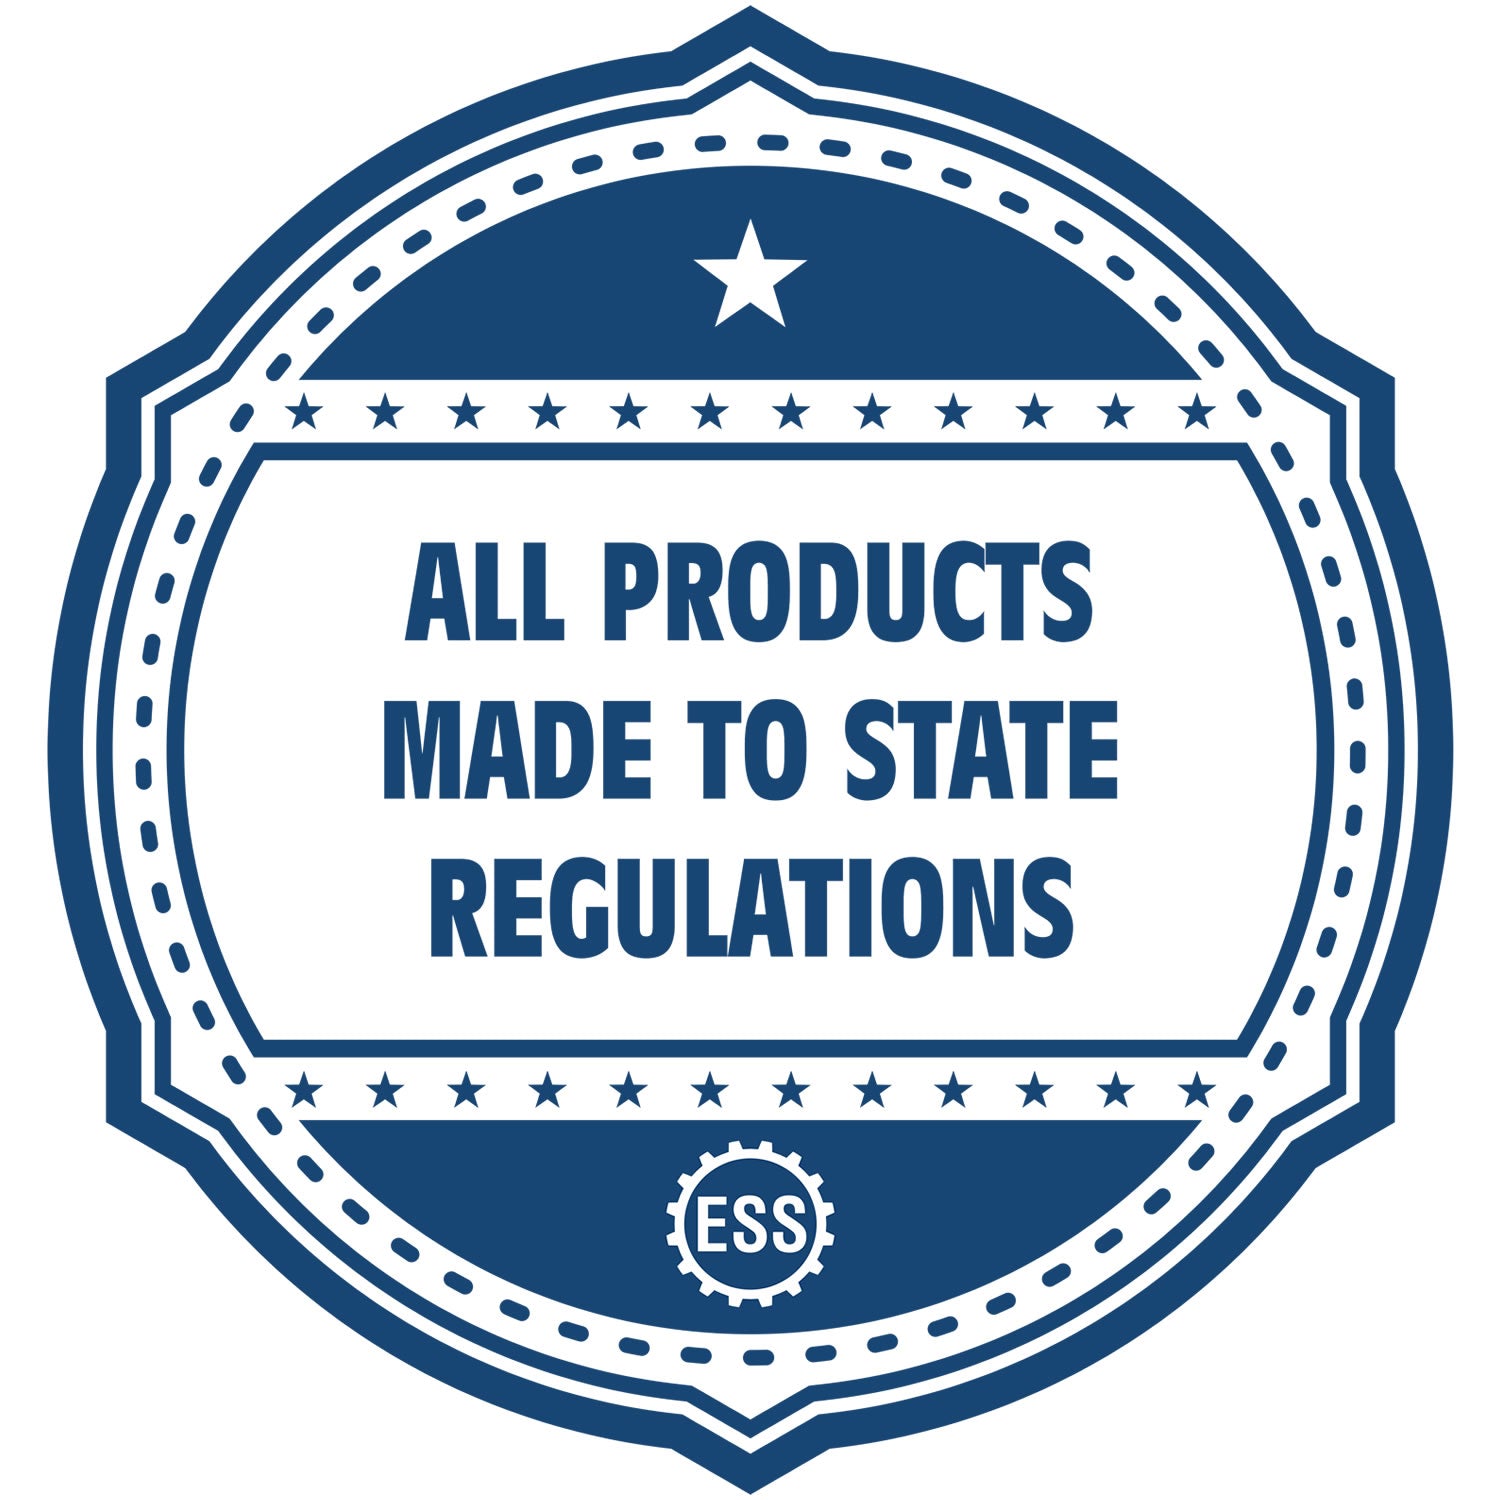 An icon or badge element for the Digital Minnesota PE Stamp and Electronic Seal for Minnesota Engineer showing that this product is made in compliance with state regulations.